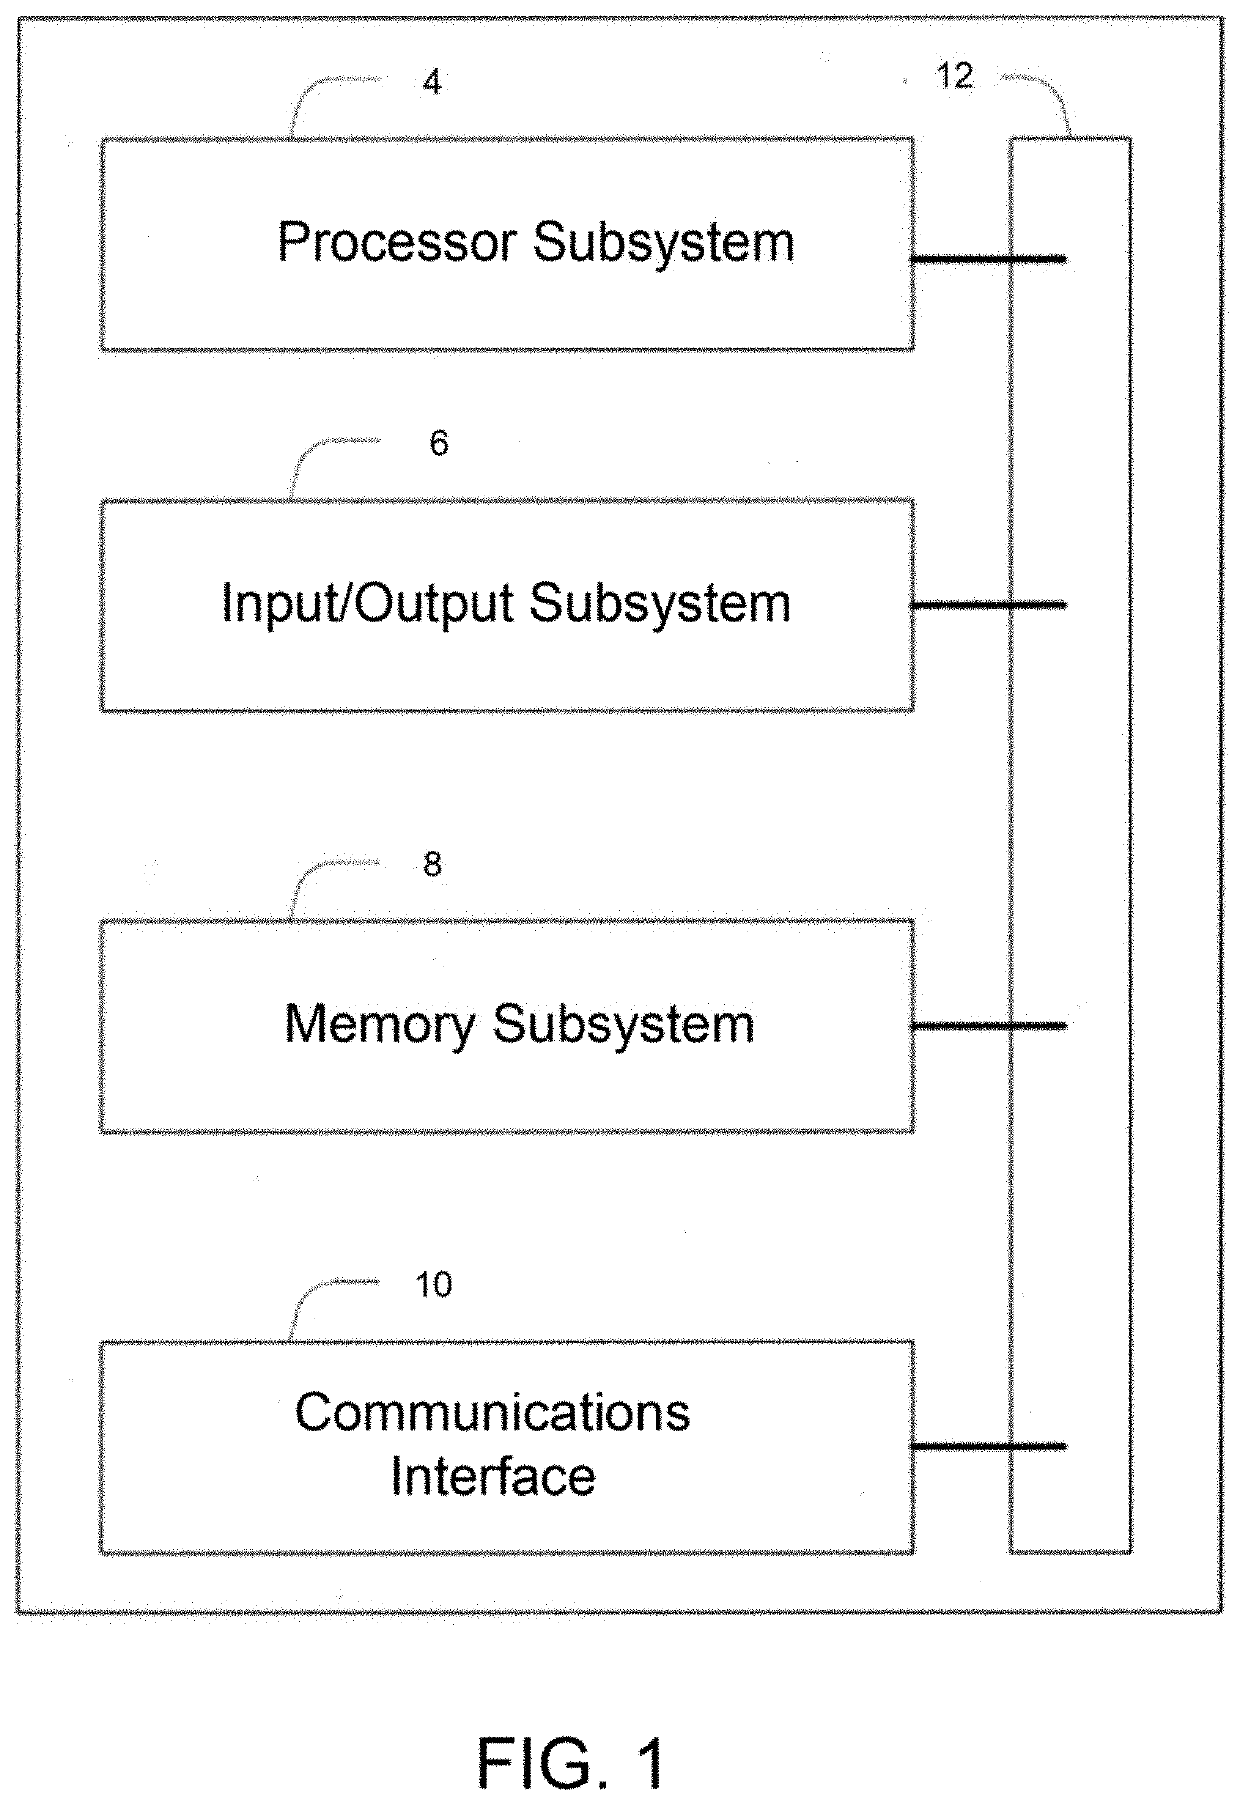 Systems and methods for e-commerce api orchestration using natural language interfaces